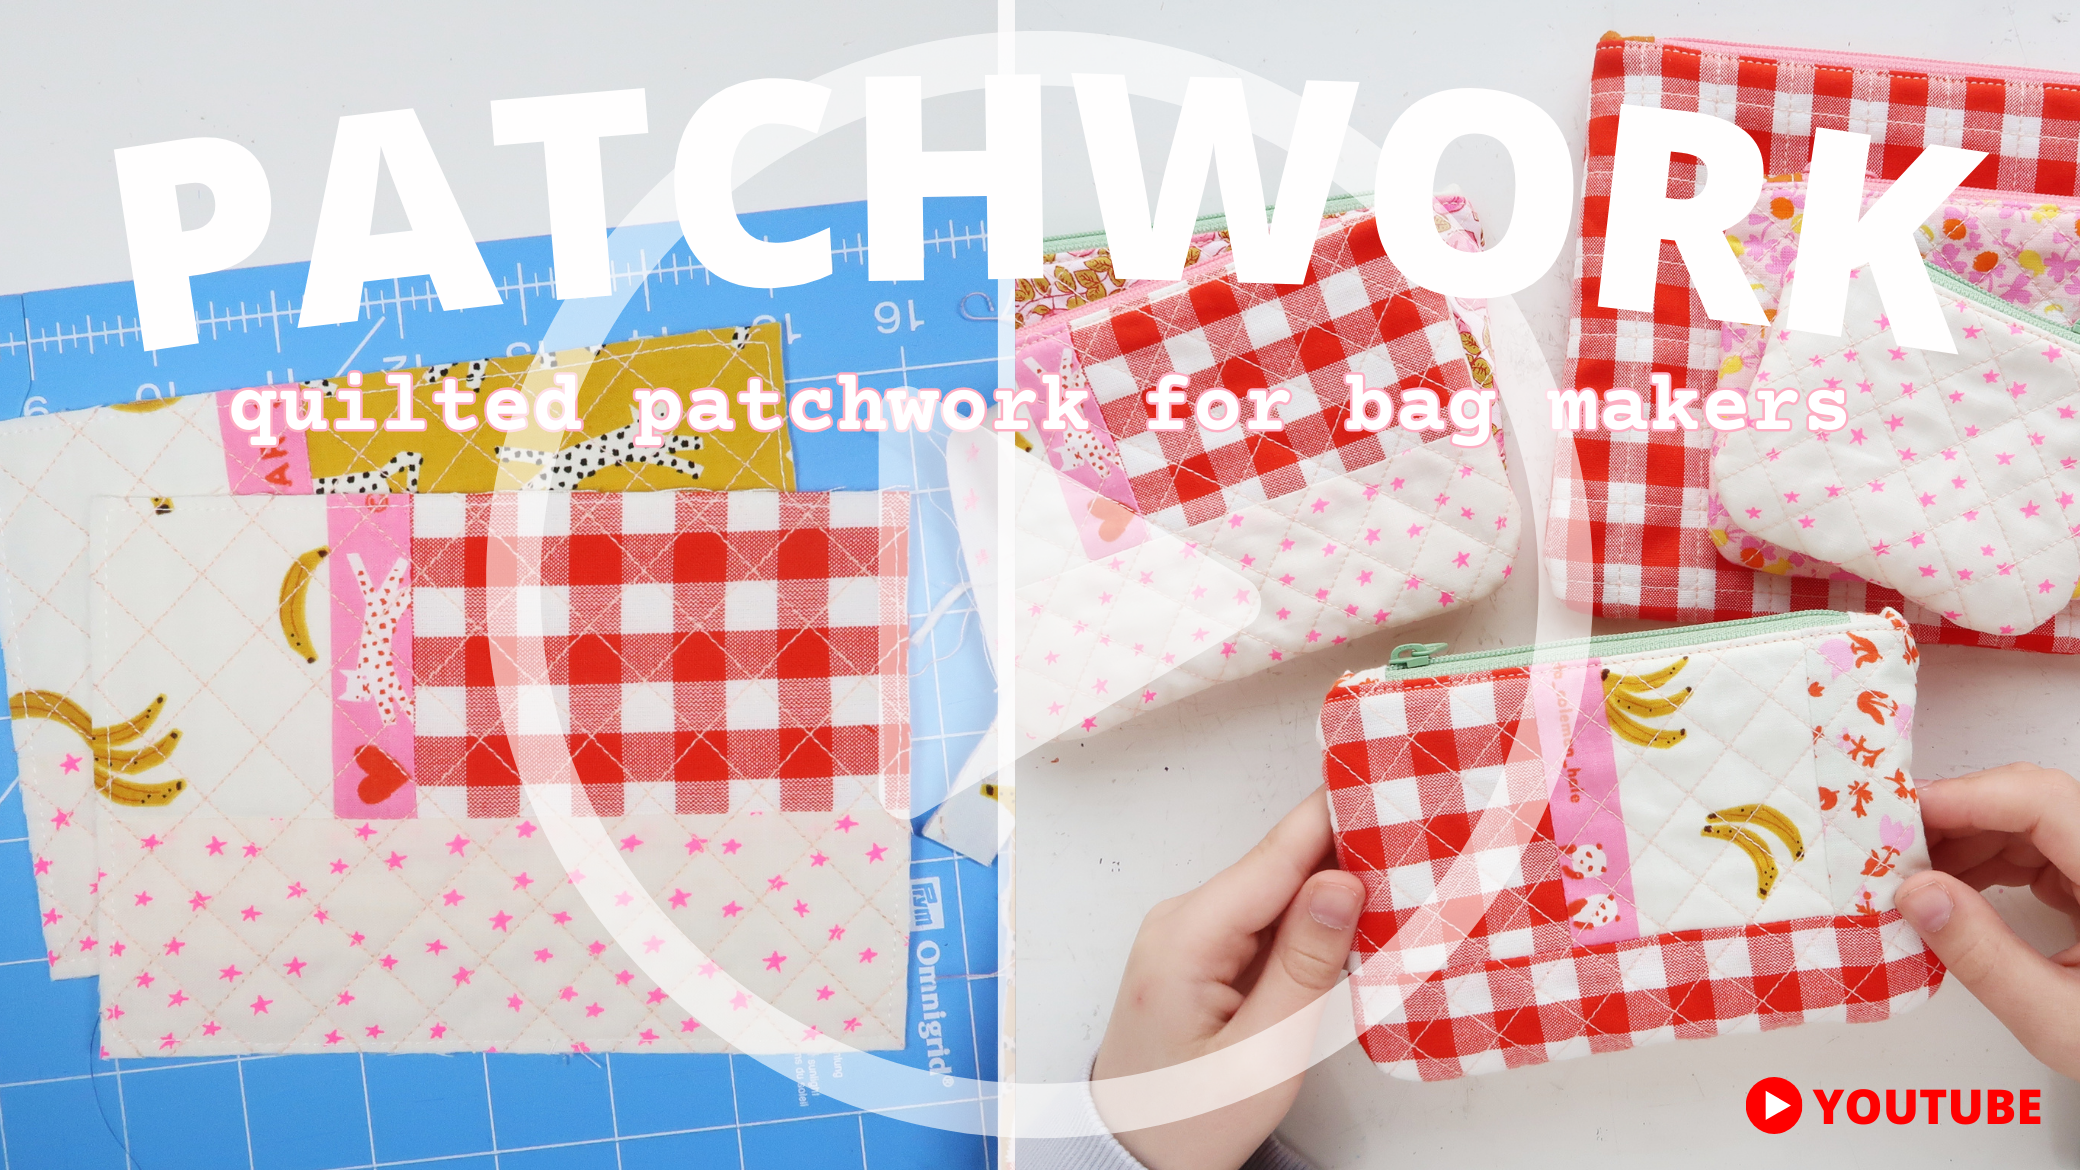 how to turn scraps into a patchwork panel for your next bag - video tutorial